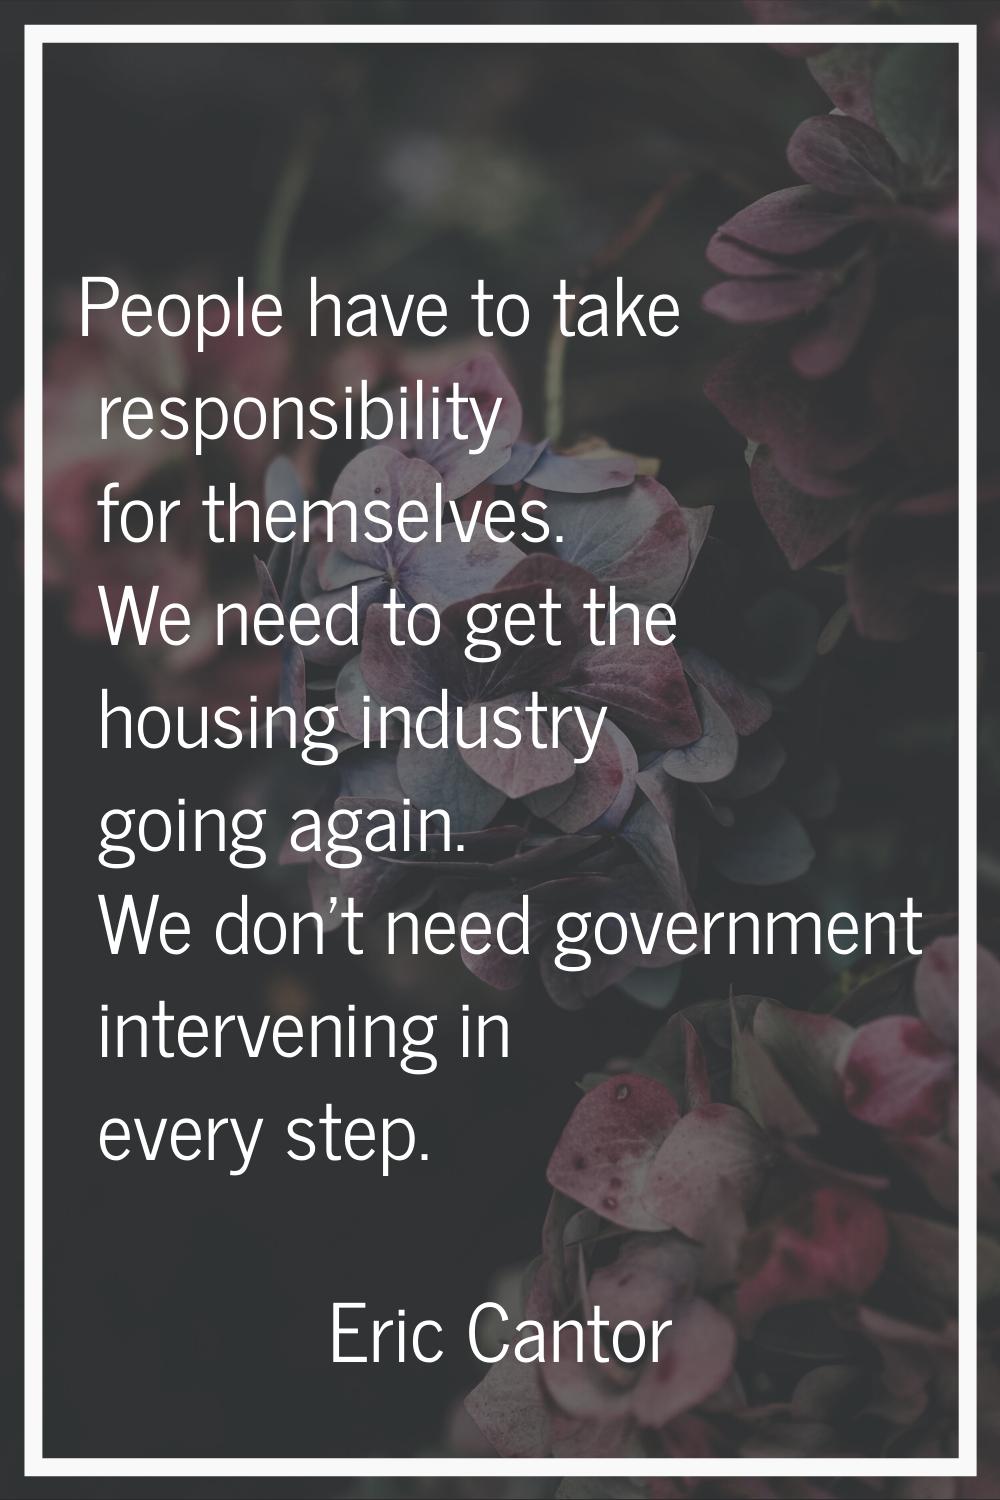 People have to take responsibility for themselves. We need to get the housing industry going again.